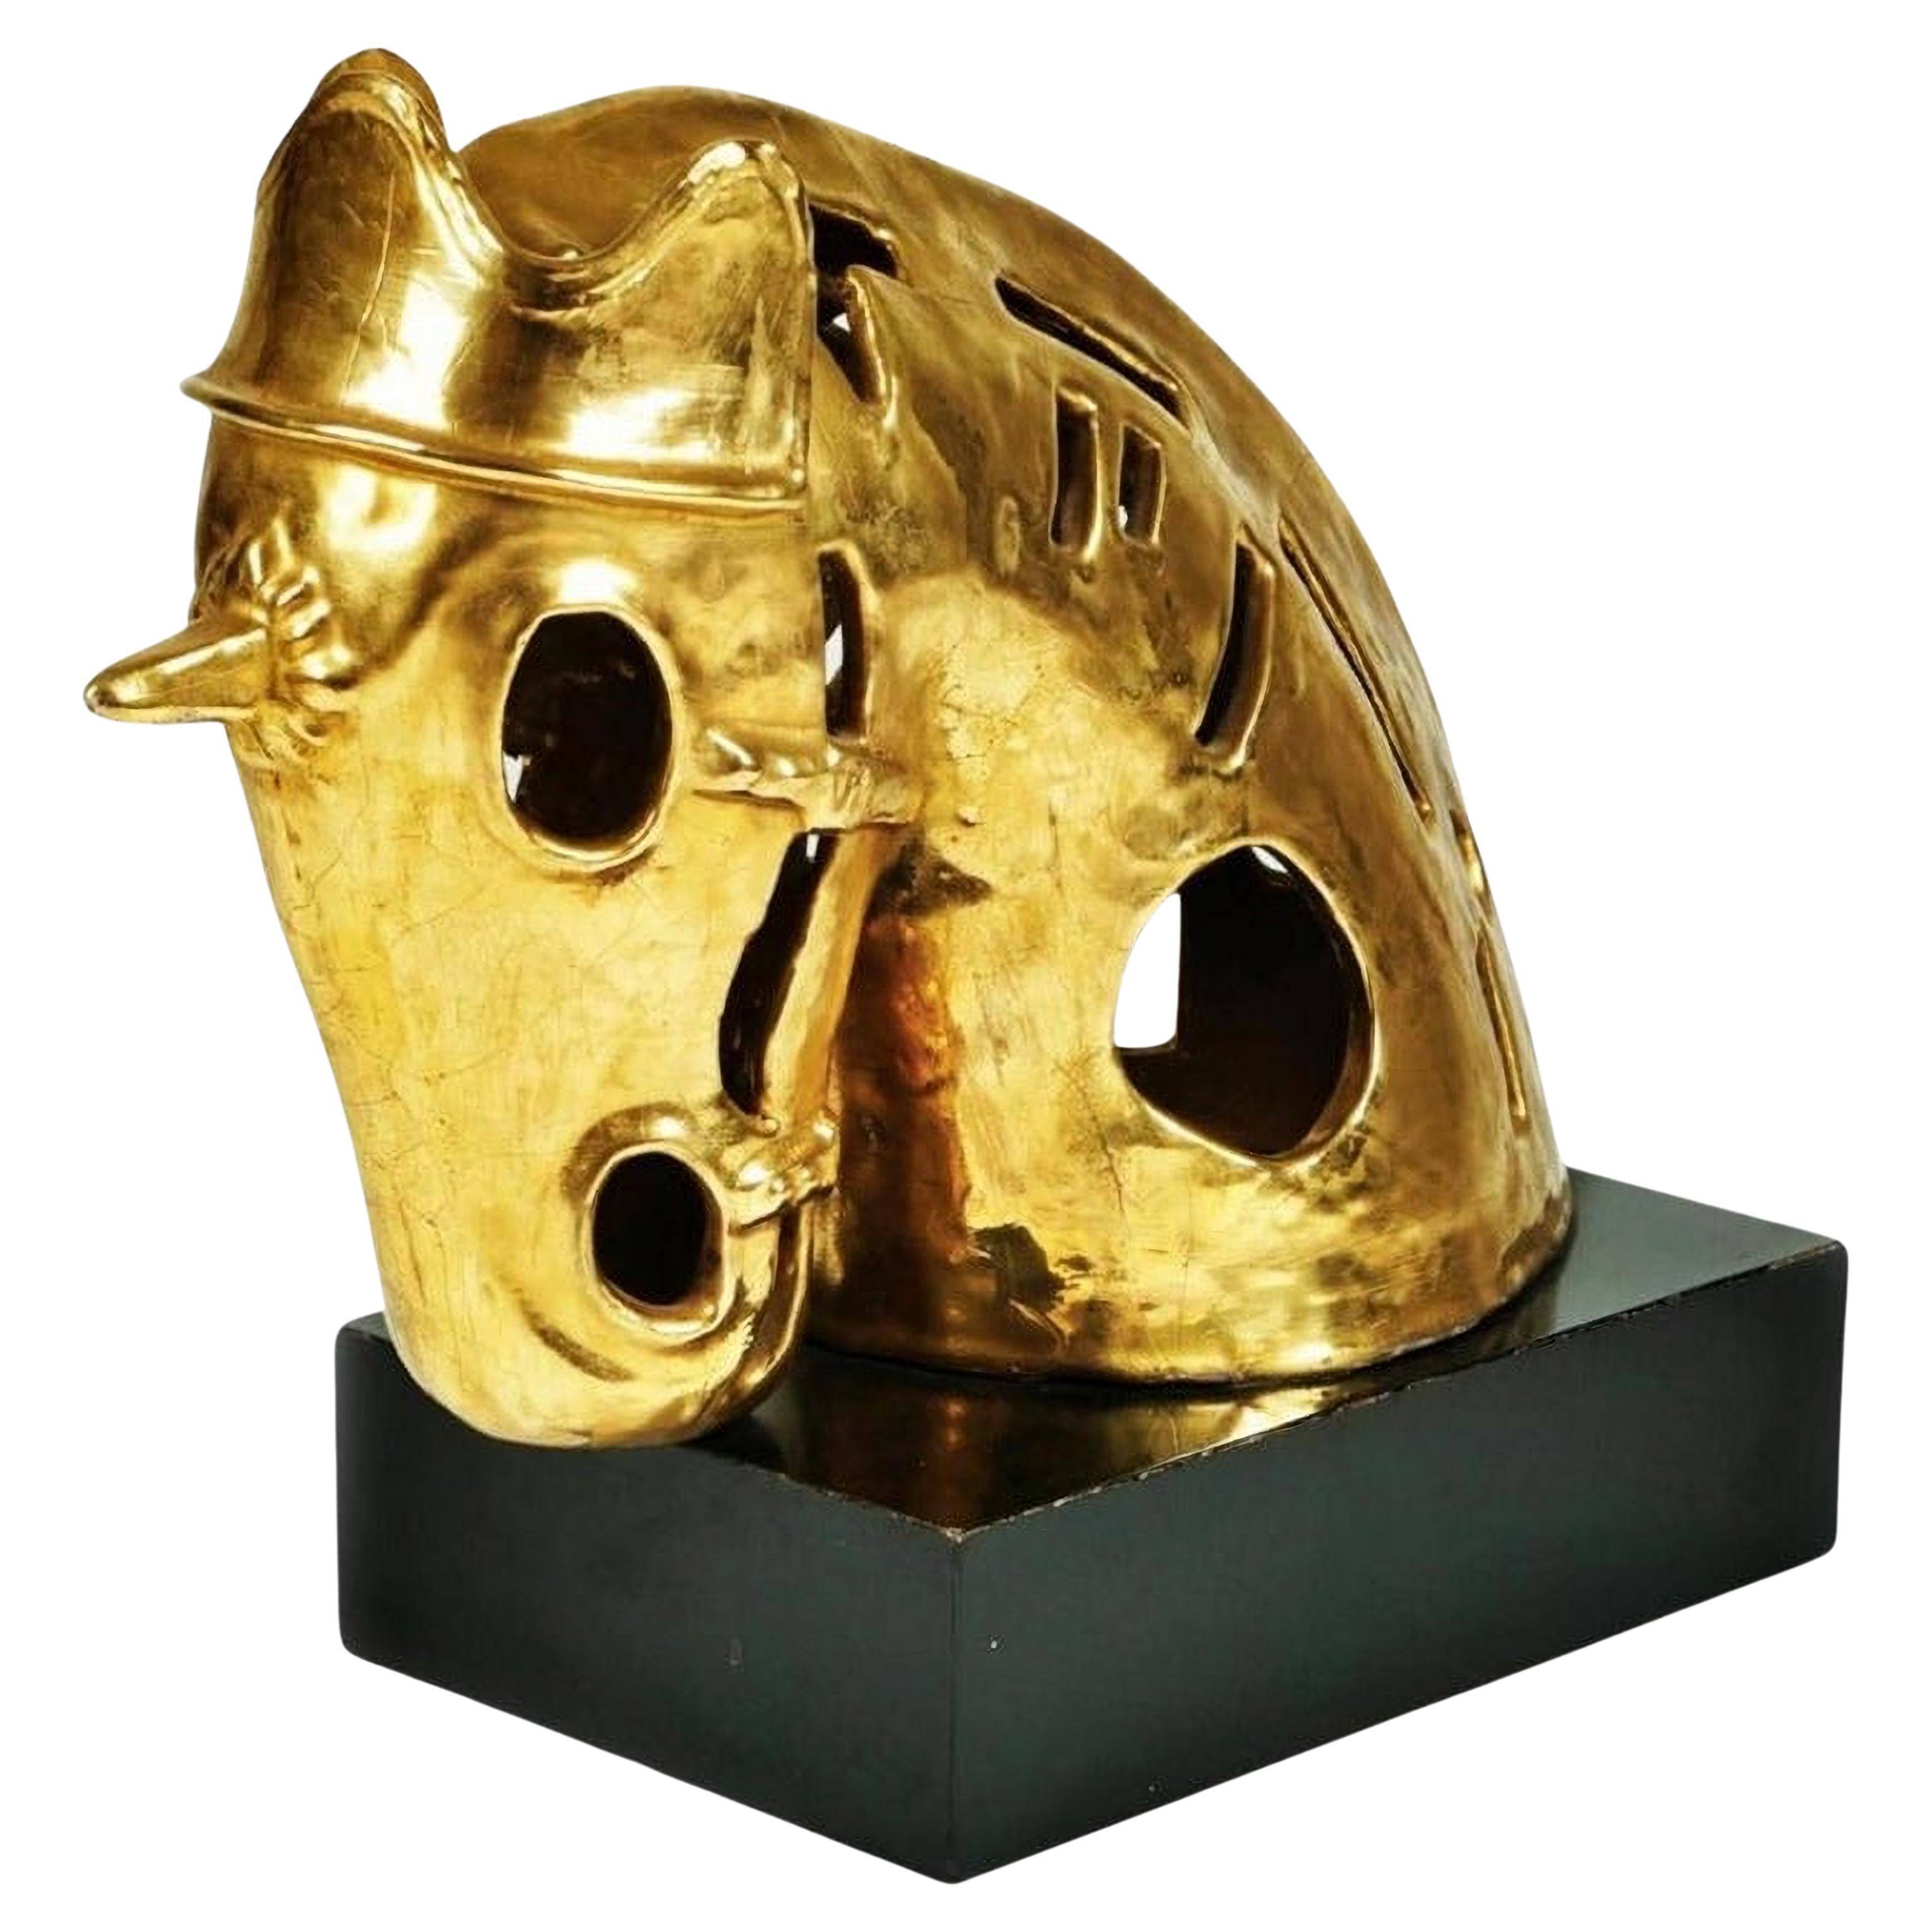 Italian Horse Head Sculpture in Golden Ceramic Early 20th Century For Sale